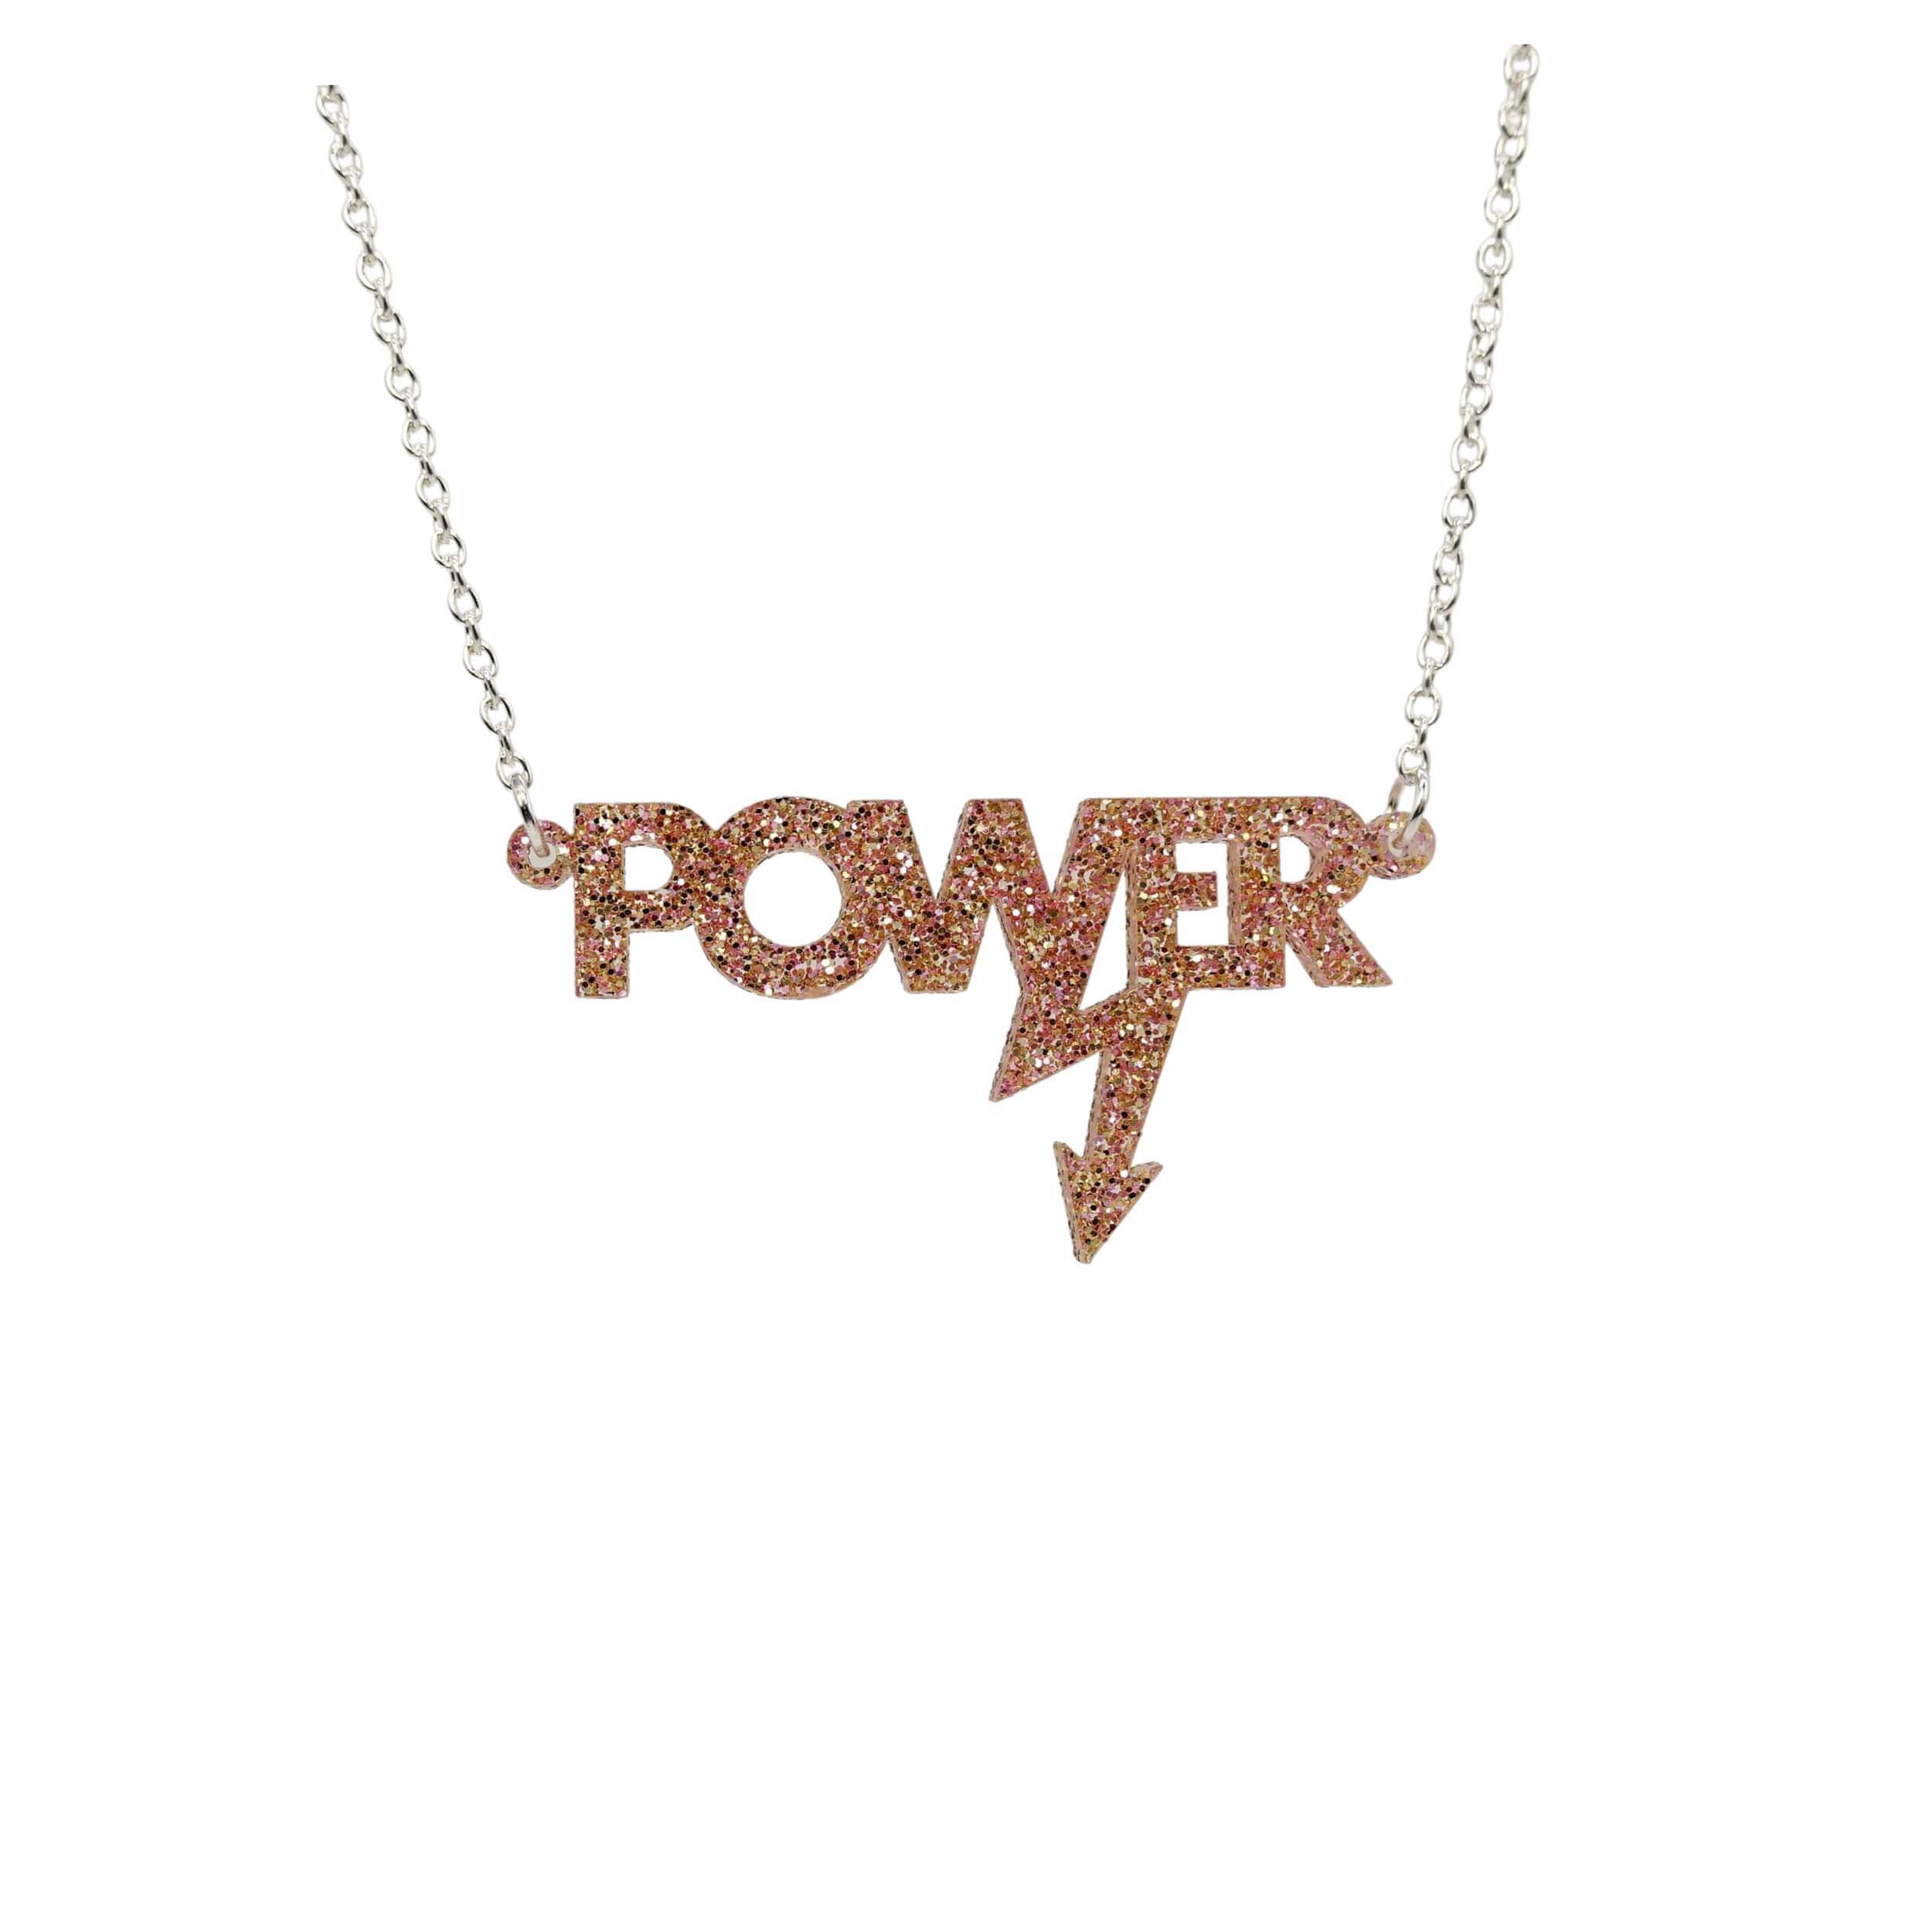 Mini power necklace in pink fizz glitter, shown hanging against a white background.